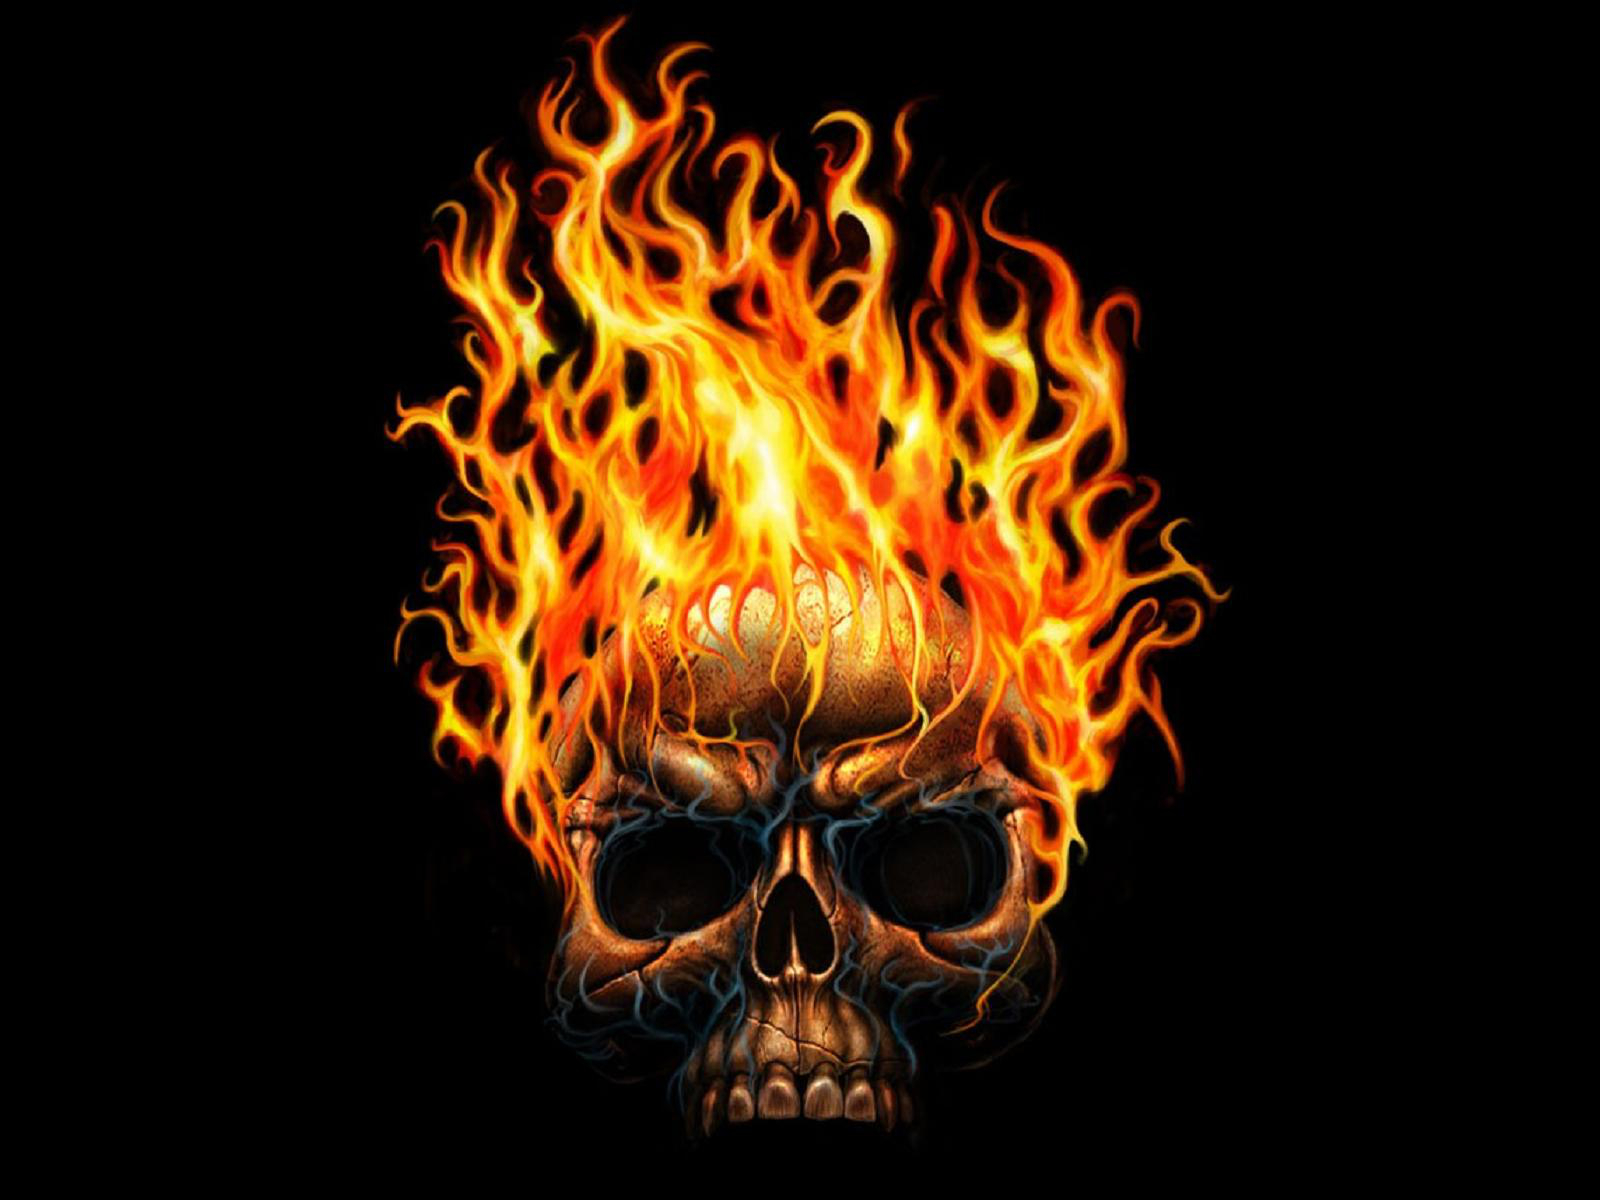 Skull Wallpapers High Quality | Download Free